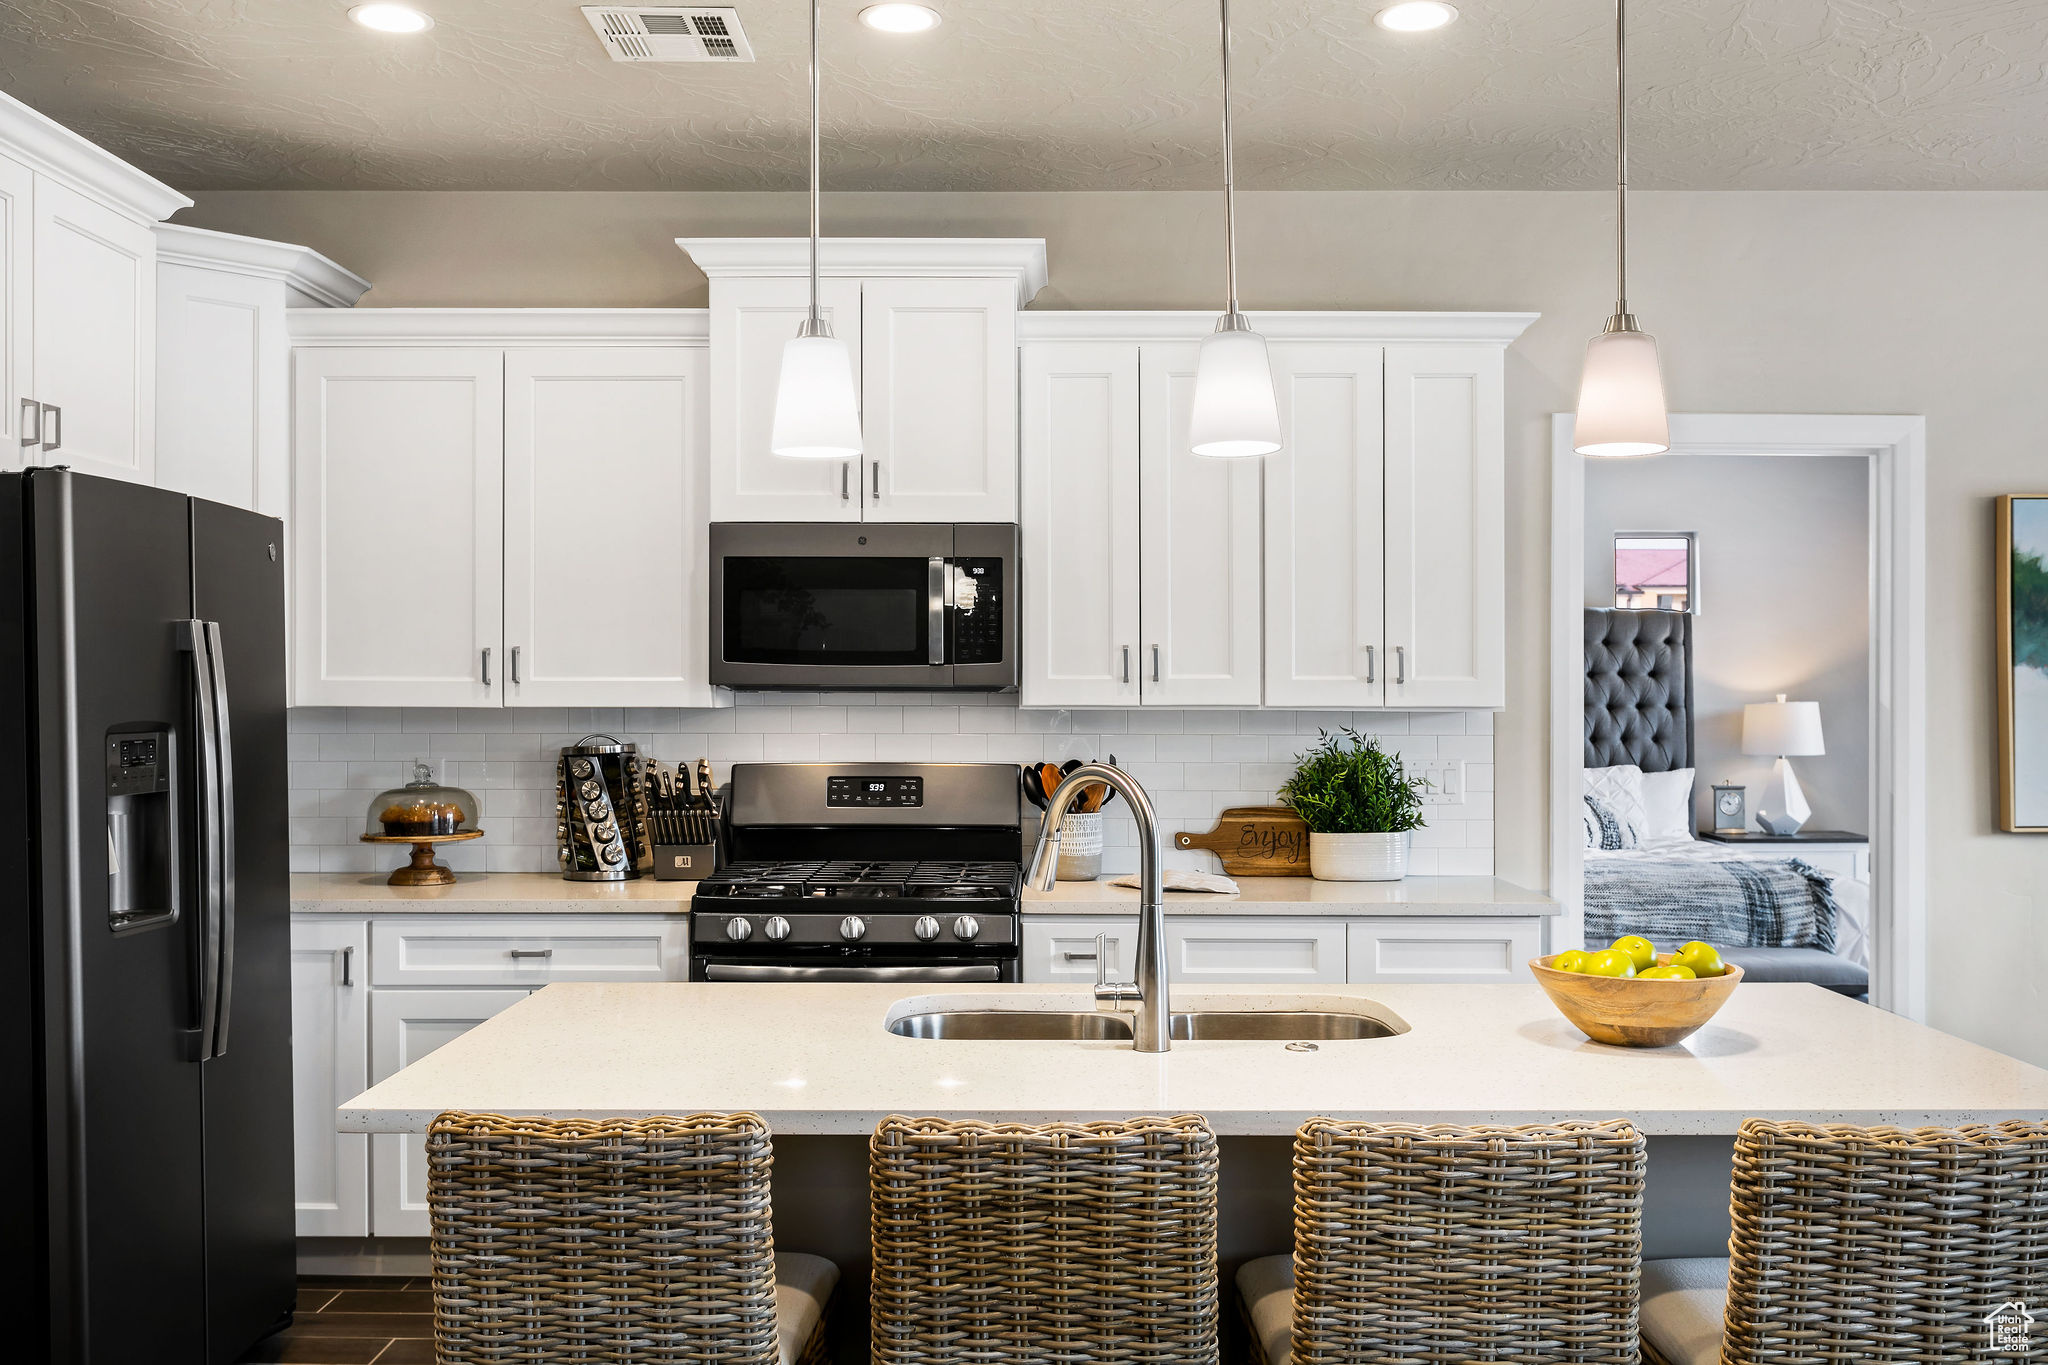 Kitchen featuring stainless steel appliances, a center island with sink, tasteful backsplash, sink, and pendant lighting